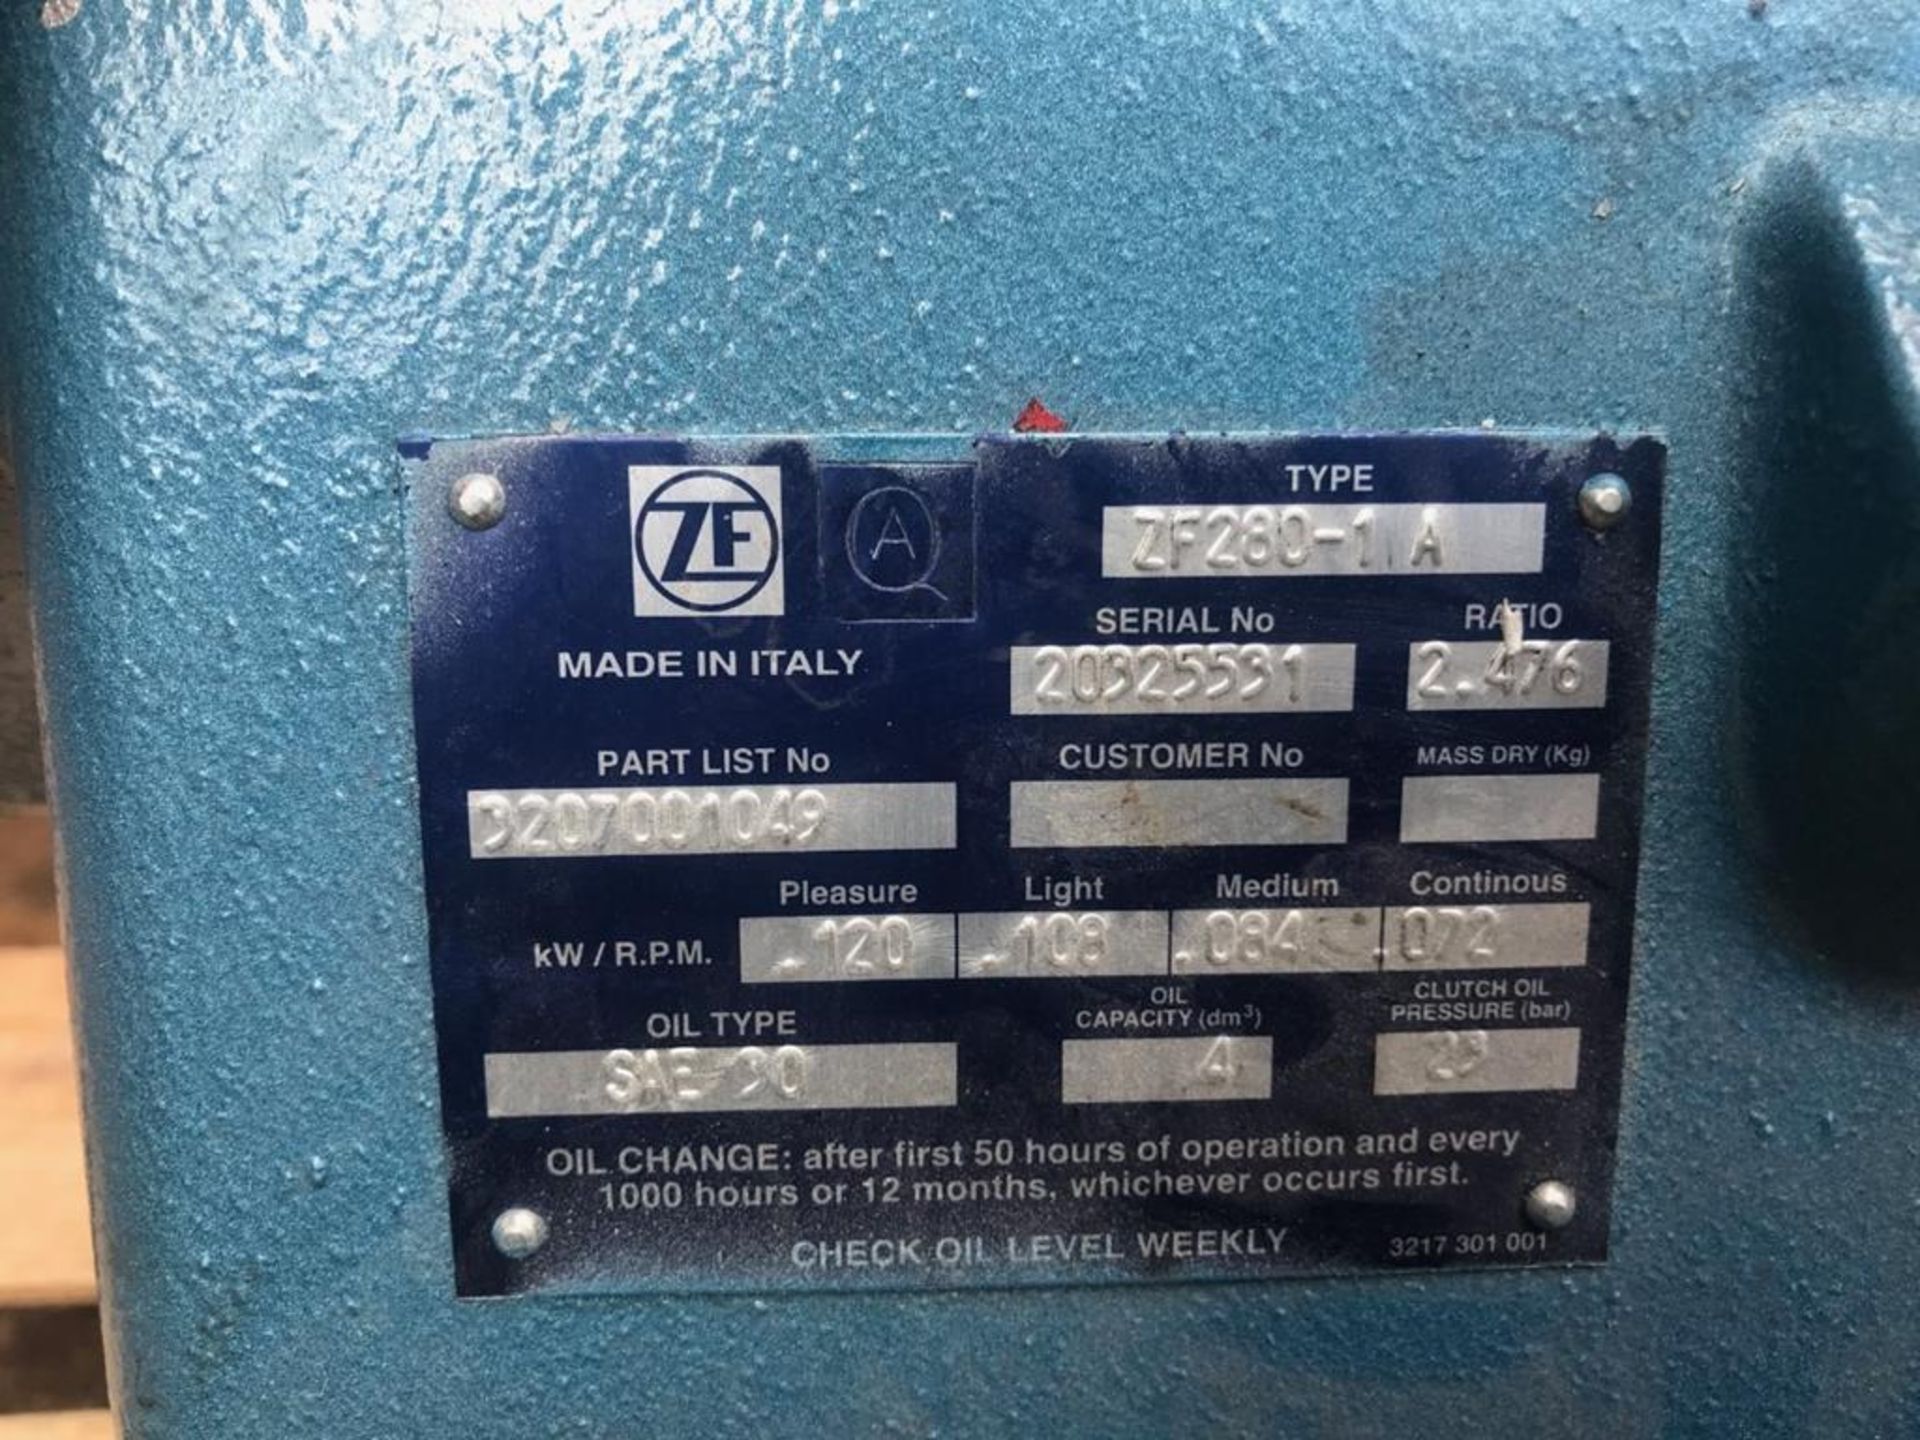 Marine Gearbox ZF 280 1A Ratio 2.476:1 New - Image 5 of 5